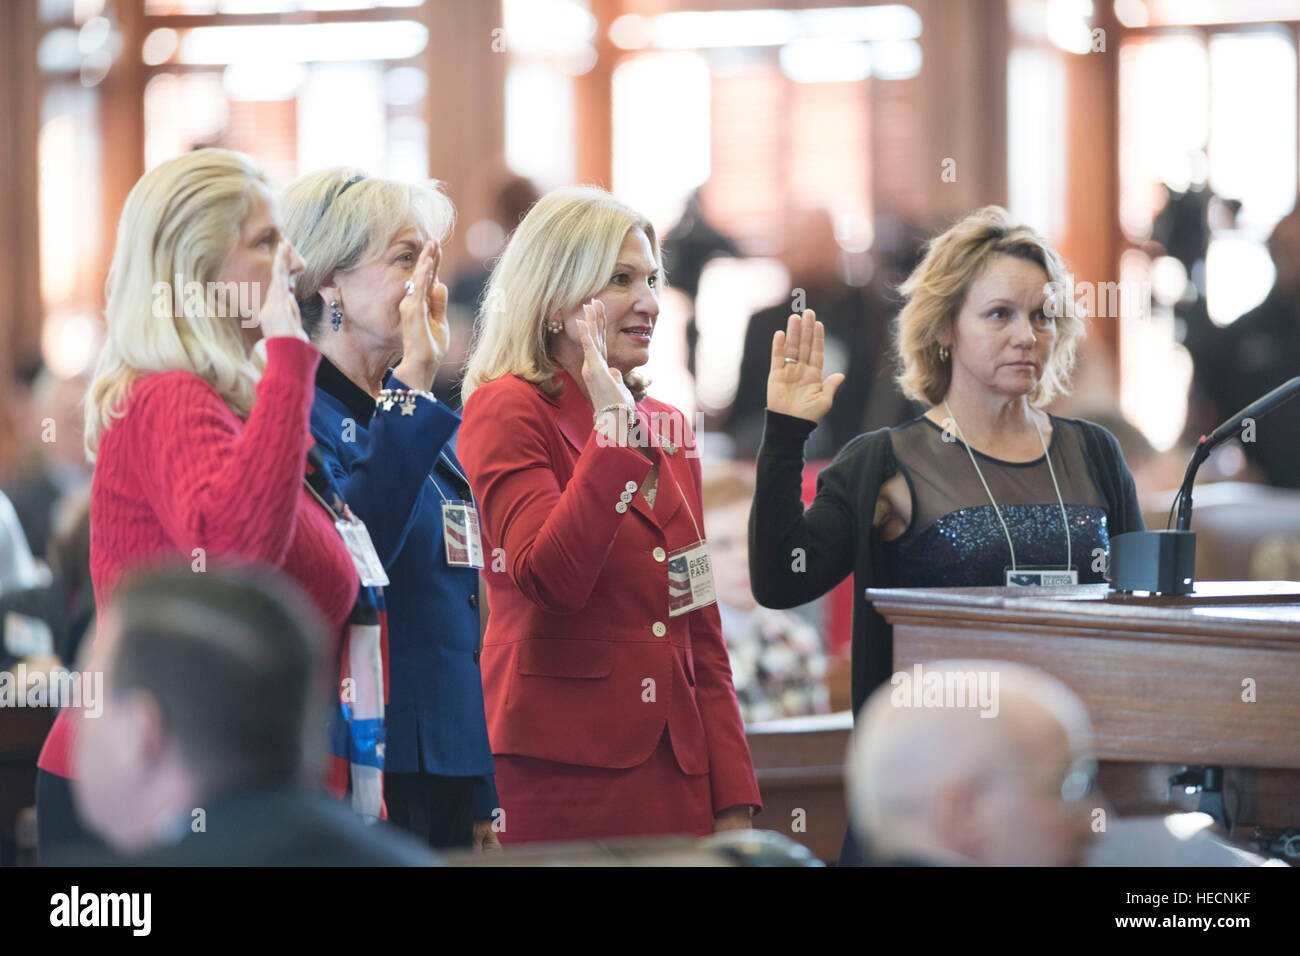 Austin, Texas, USA. 19th Dec, 2016. Texas electors to the U.S. Electoral College meet at the Texas Capitol to cast votes for President Donald Trump and Vice-President Mike Pence.  Hundreds of protesters chanted outside the Capitol during the vote. Credit: Bob Daemmrich/Alamy Live News Stock Photo